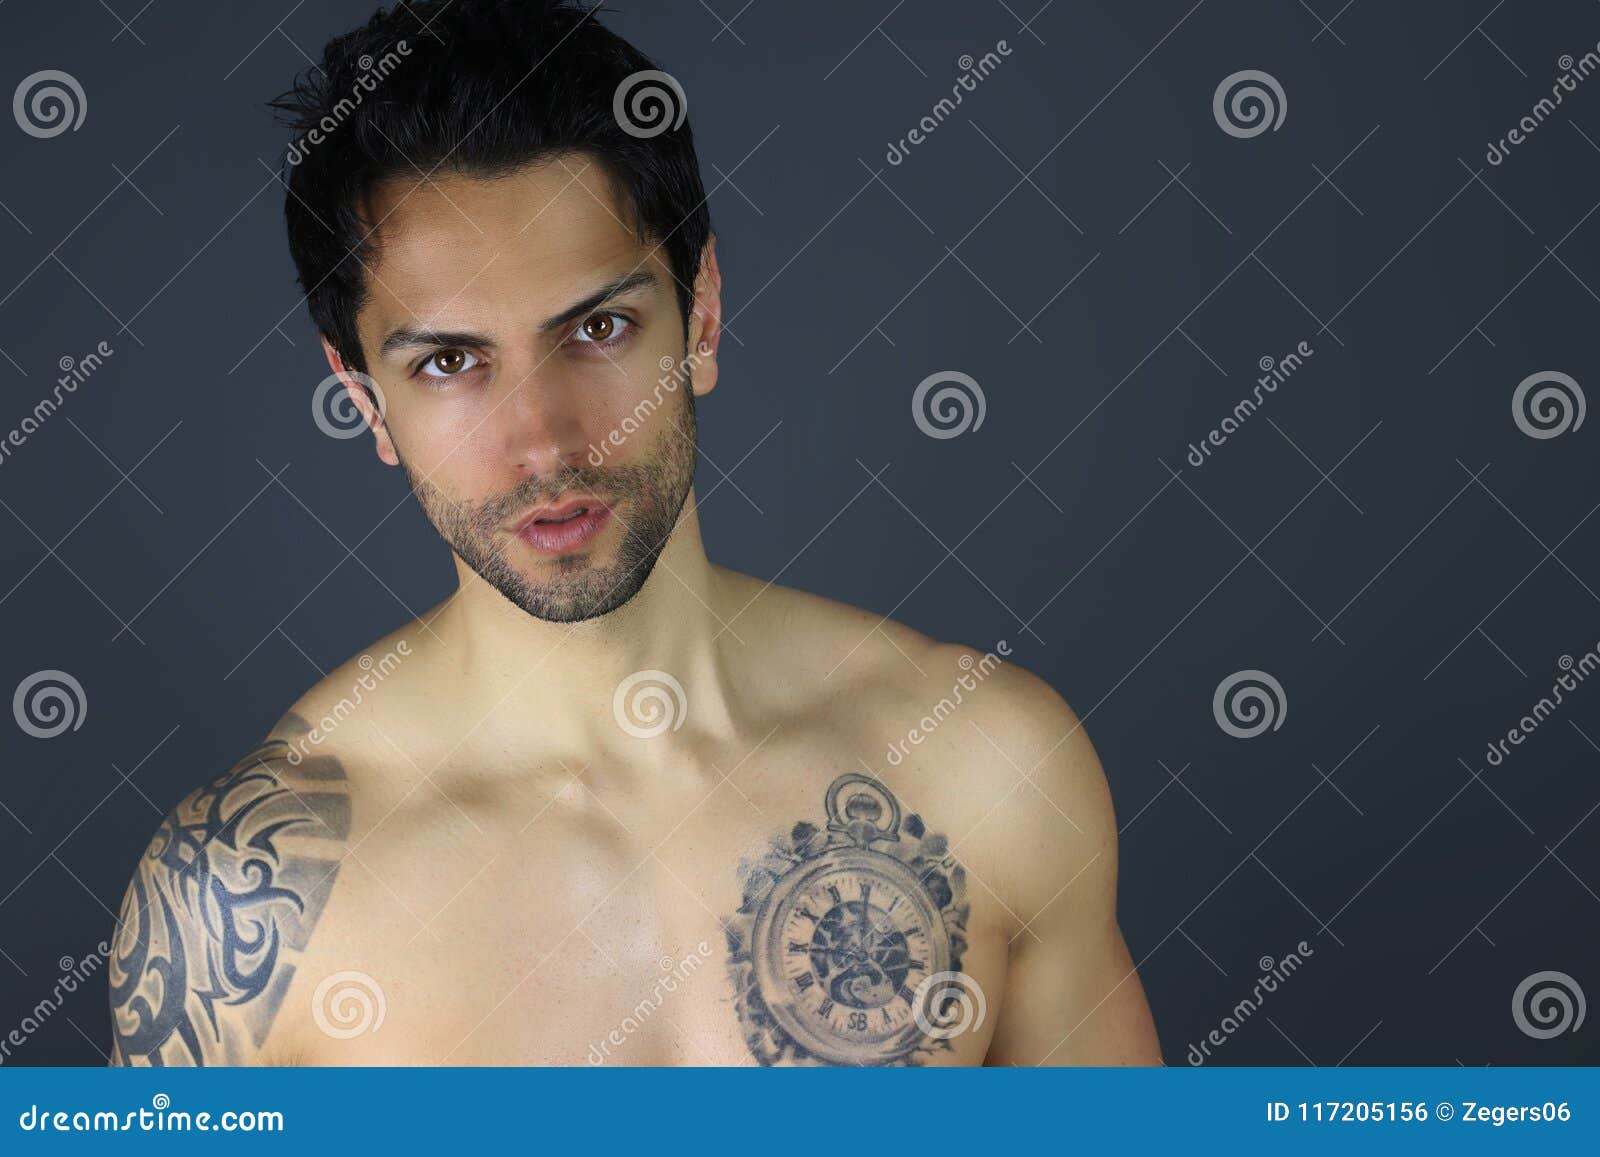 Very Handsome Man with Tattoos. Attractive Young Model Stock Photo